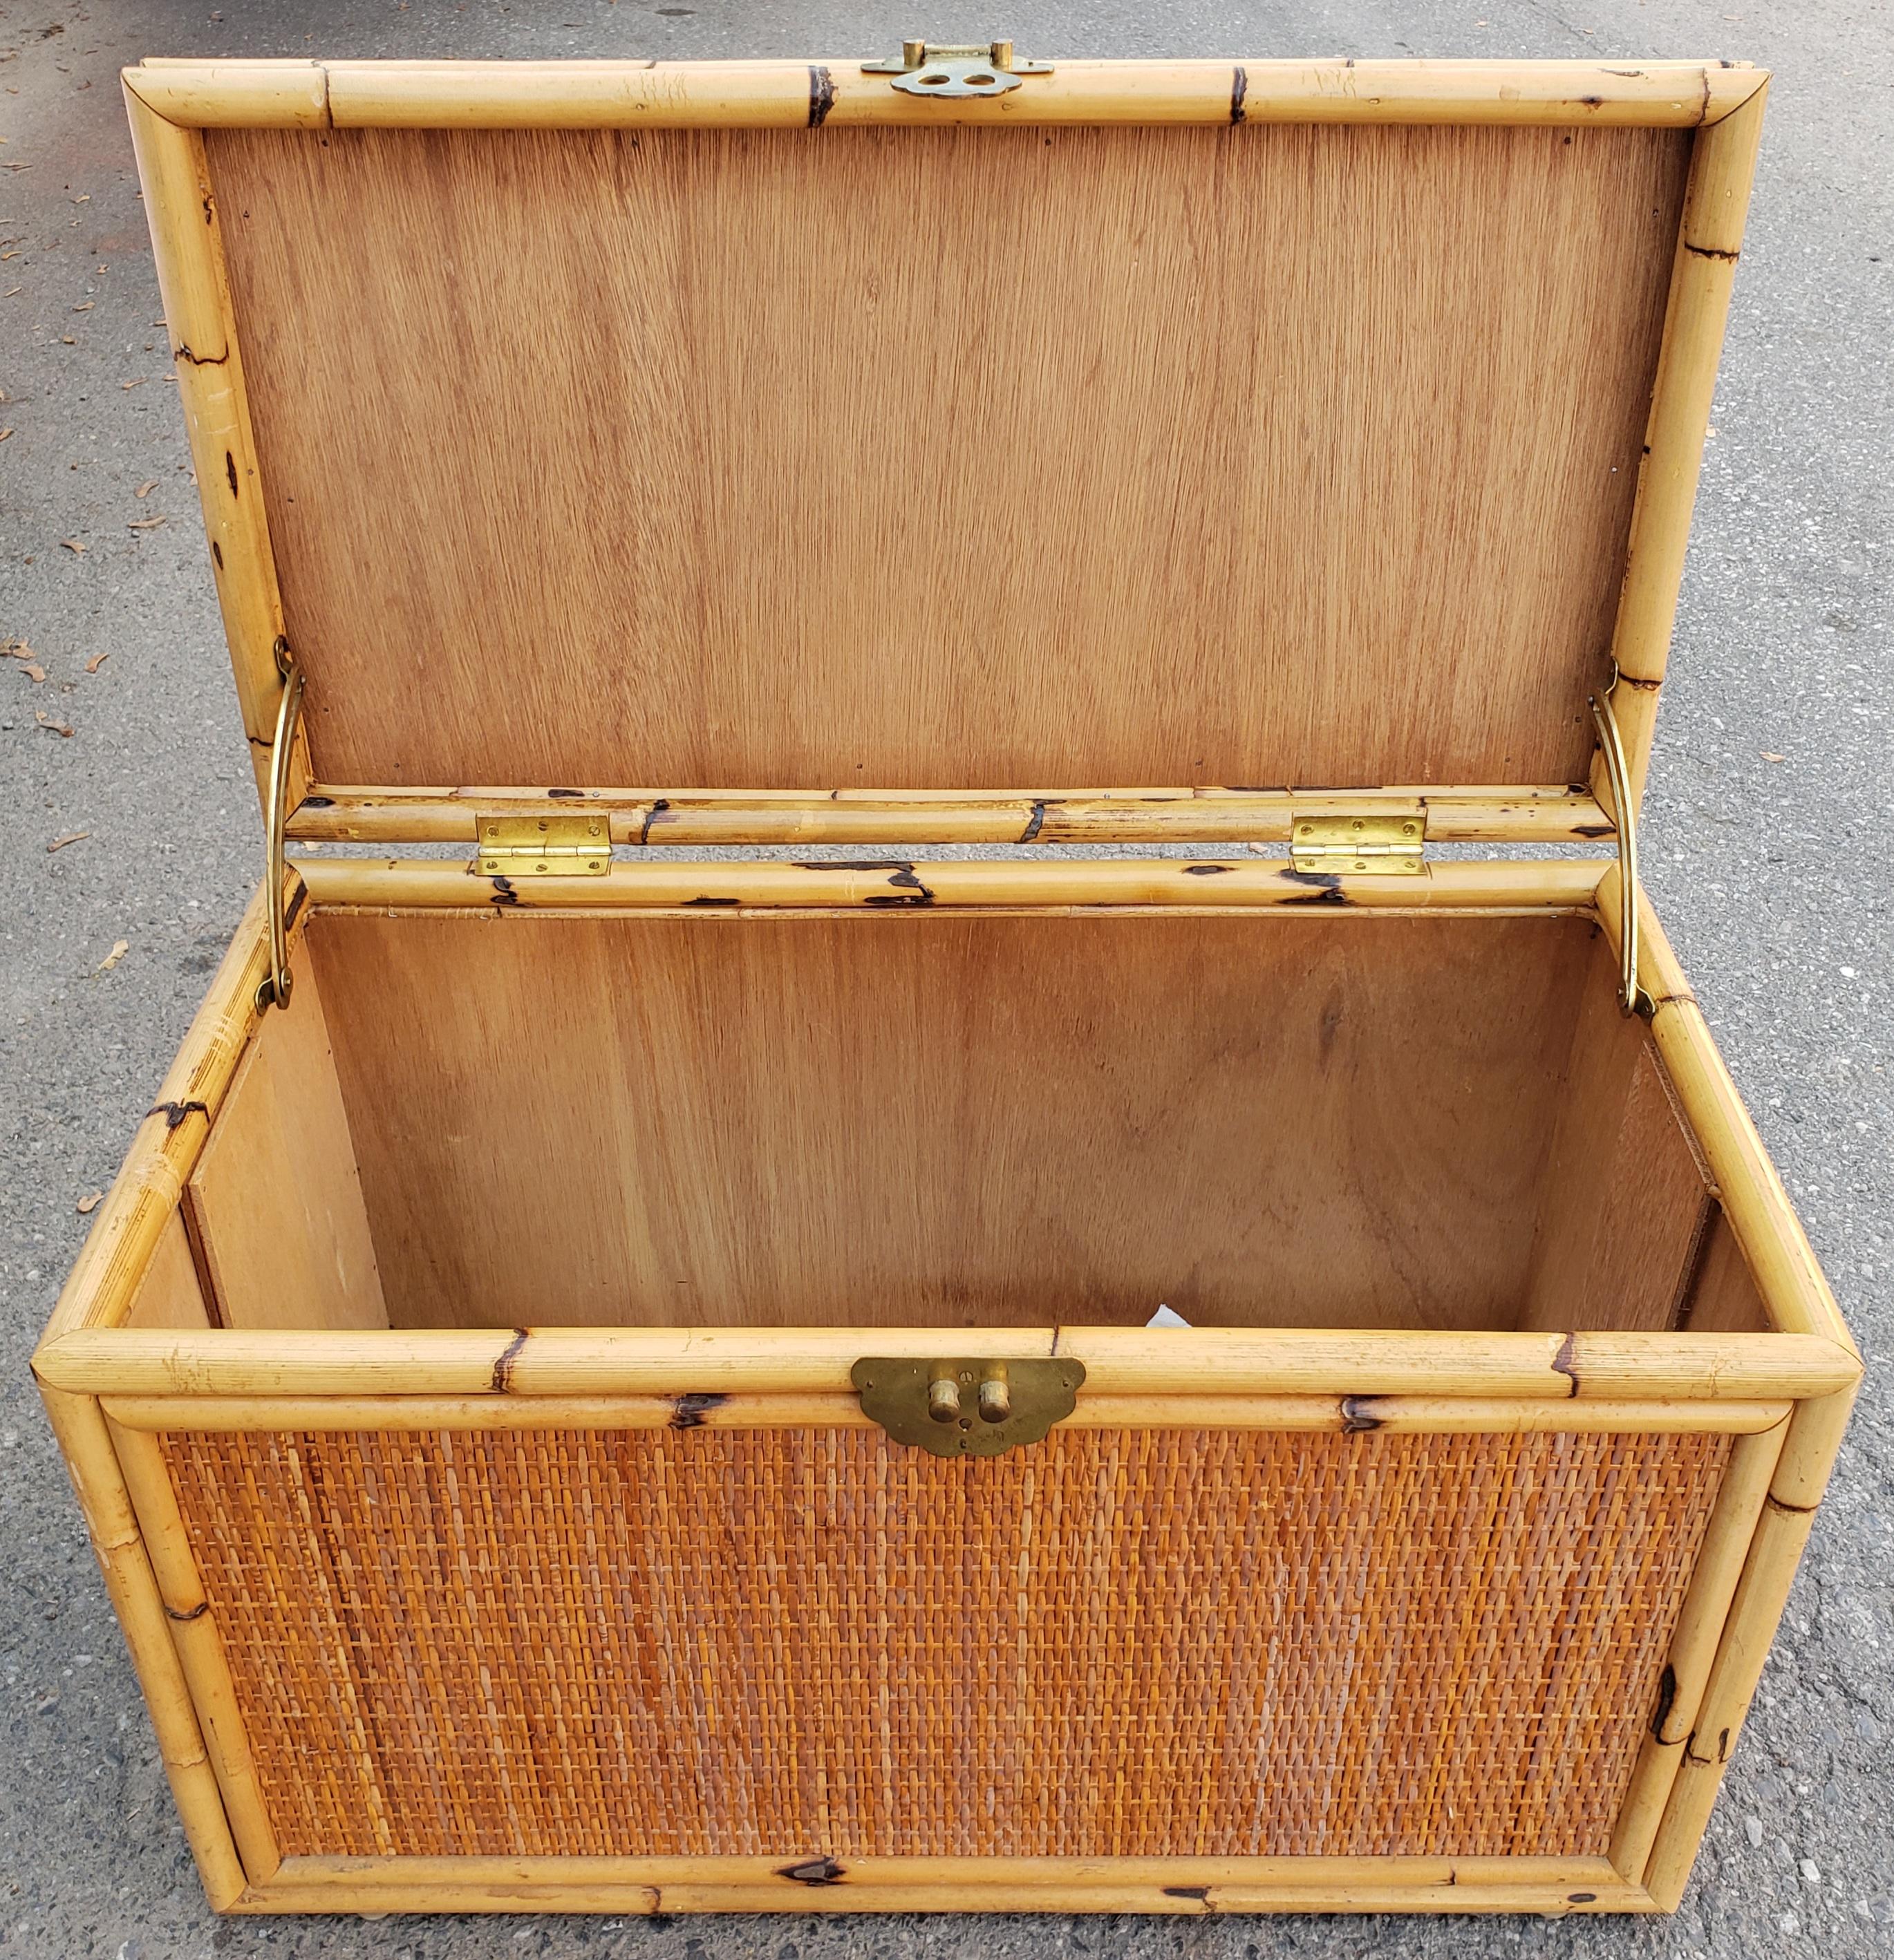 McGuire style chinoiseries woven rattan bamboo wicker trunk in nice as found vintage condition. Minor wear and imperfections to the handmade trunk.
Great looking piece for a nice textural touch to your decor. Would be a perfect coffee table size